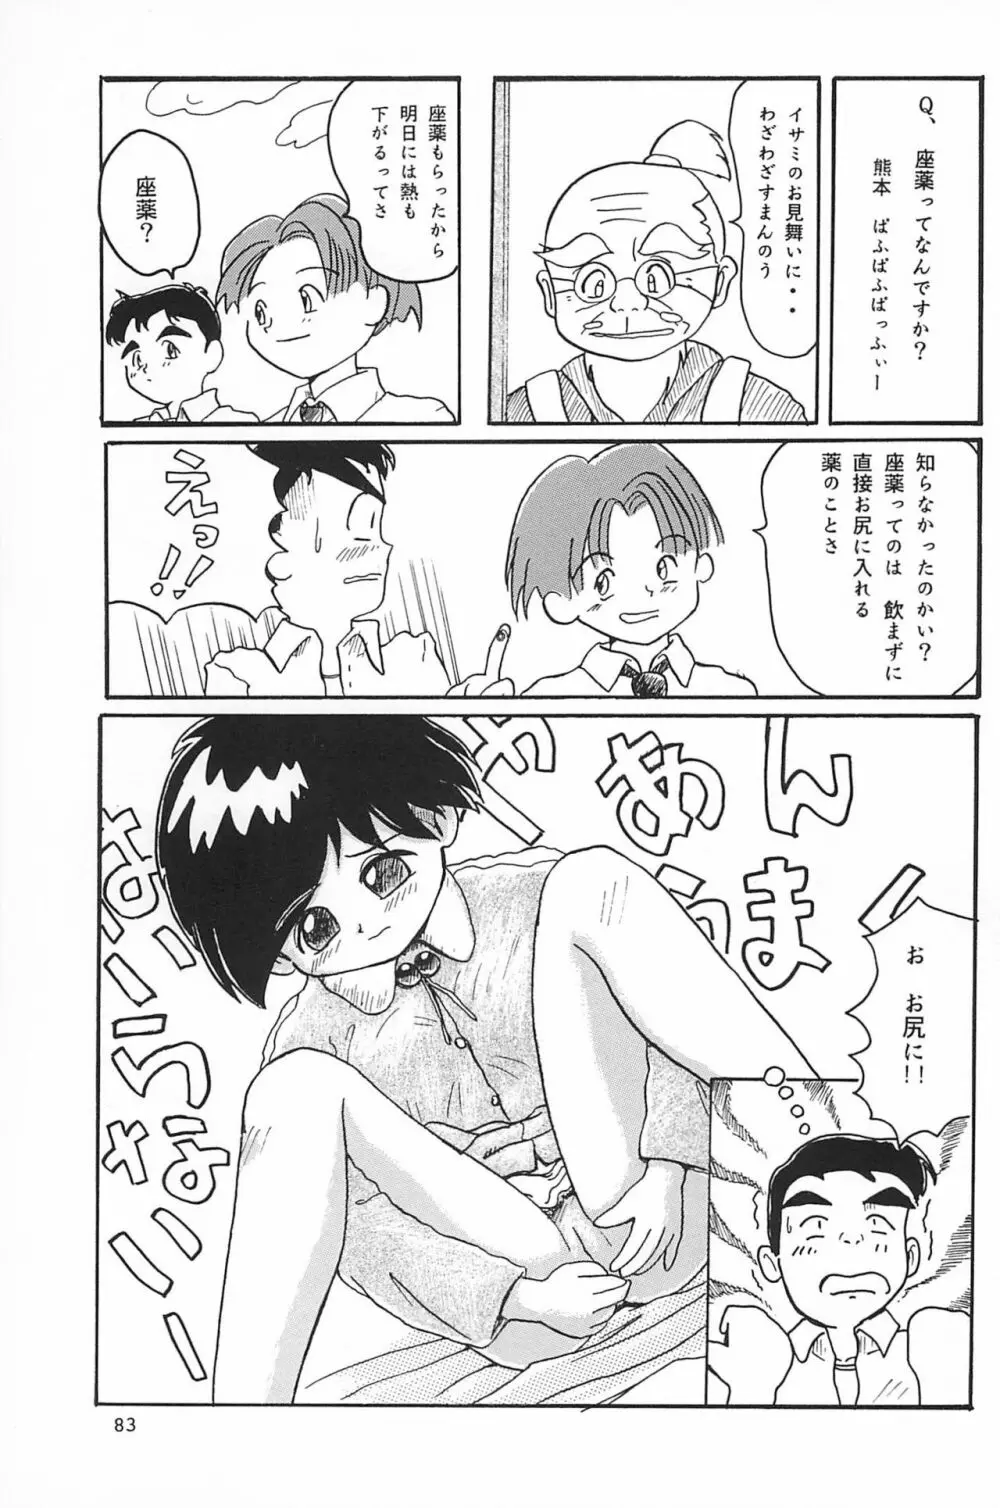 ND-special Volume 1 83ページ